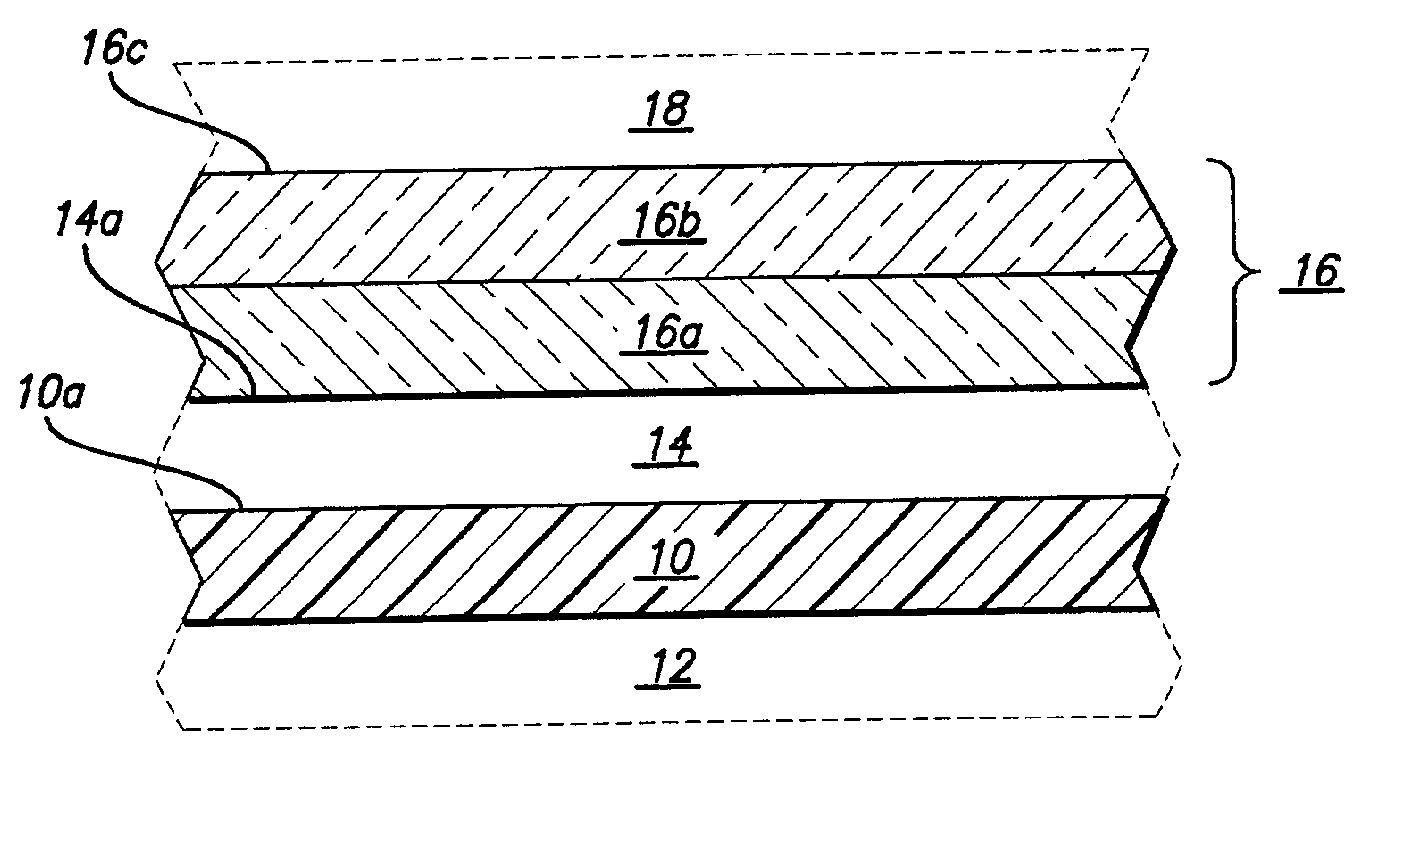 Porous inkjet receiver layer with a binder gradient